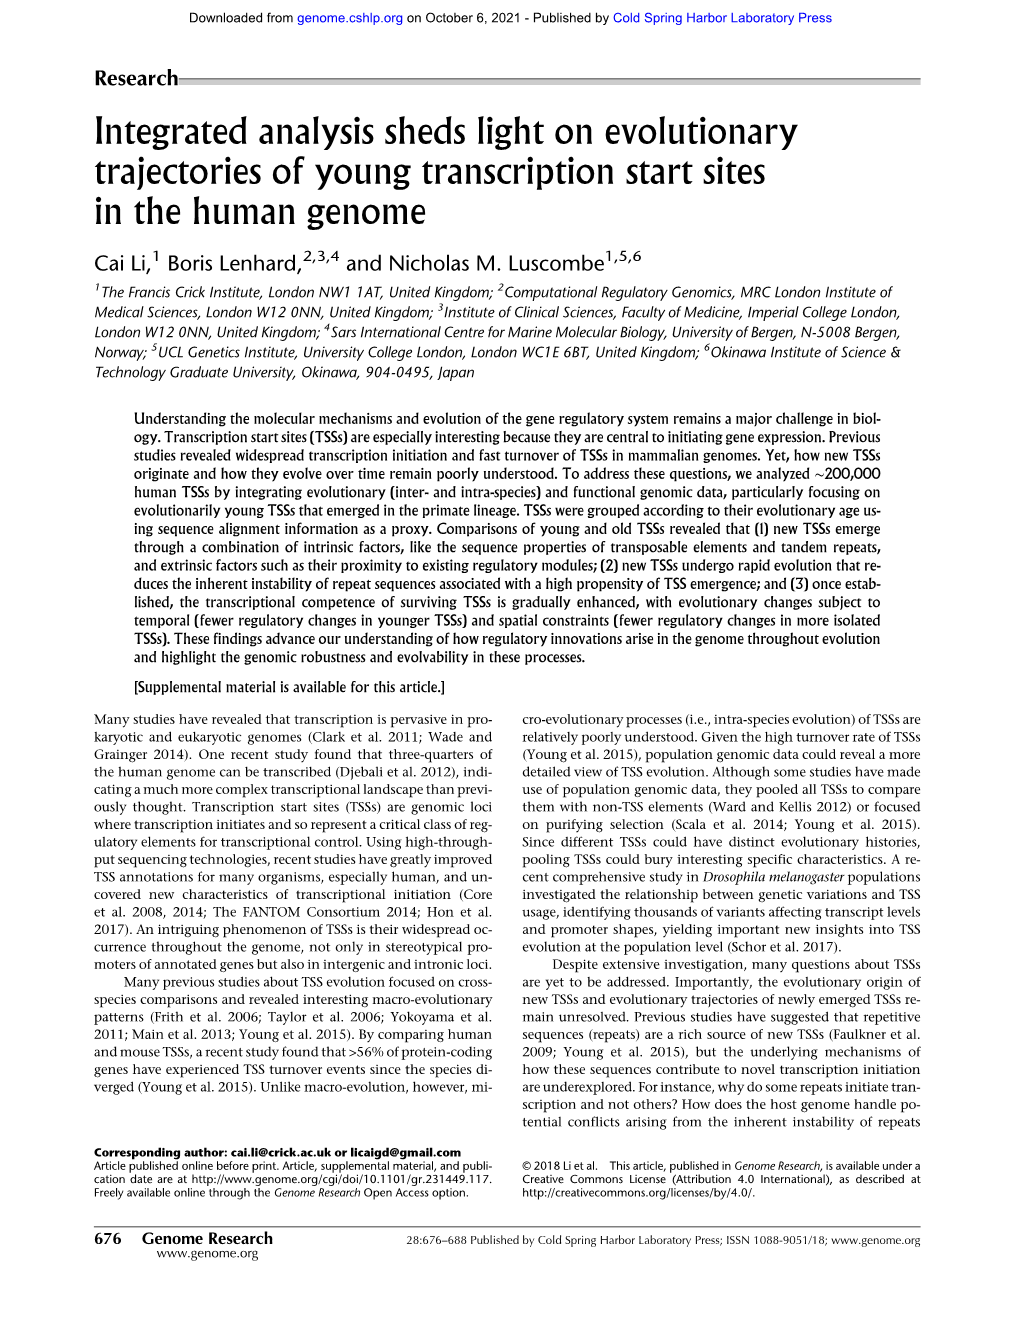 Integrated Analysis Sheds Light on Evolutionary Trajectories of Young Transcription Start Sites in the Human Genome